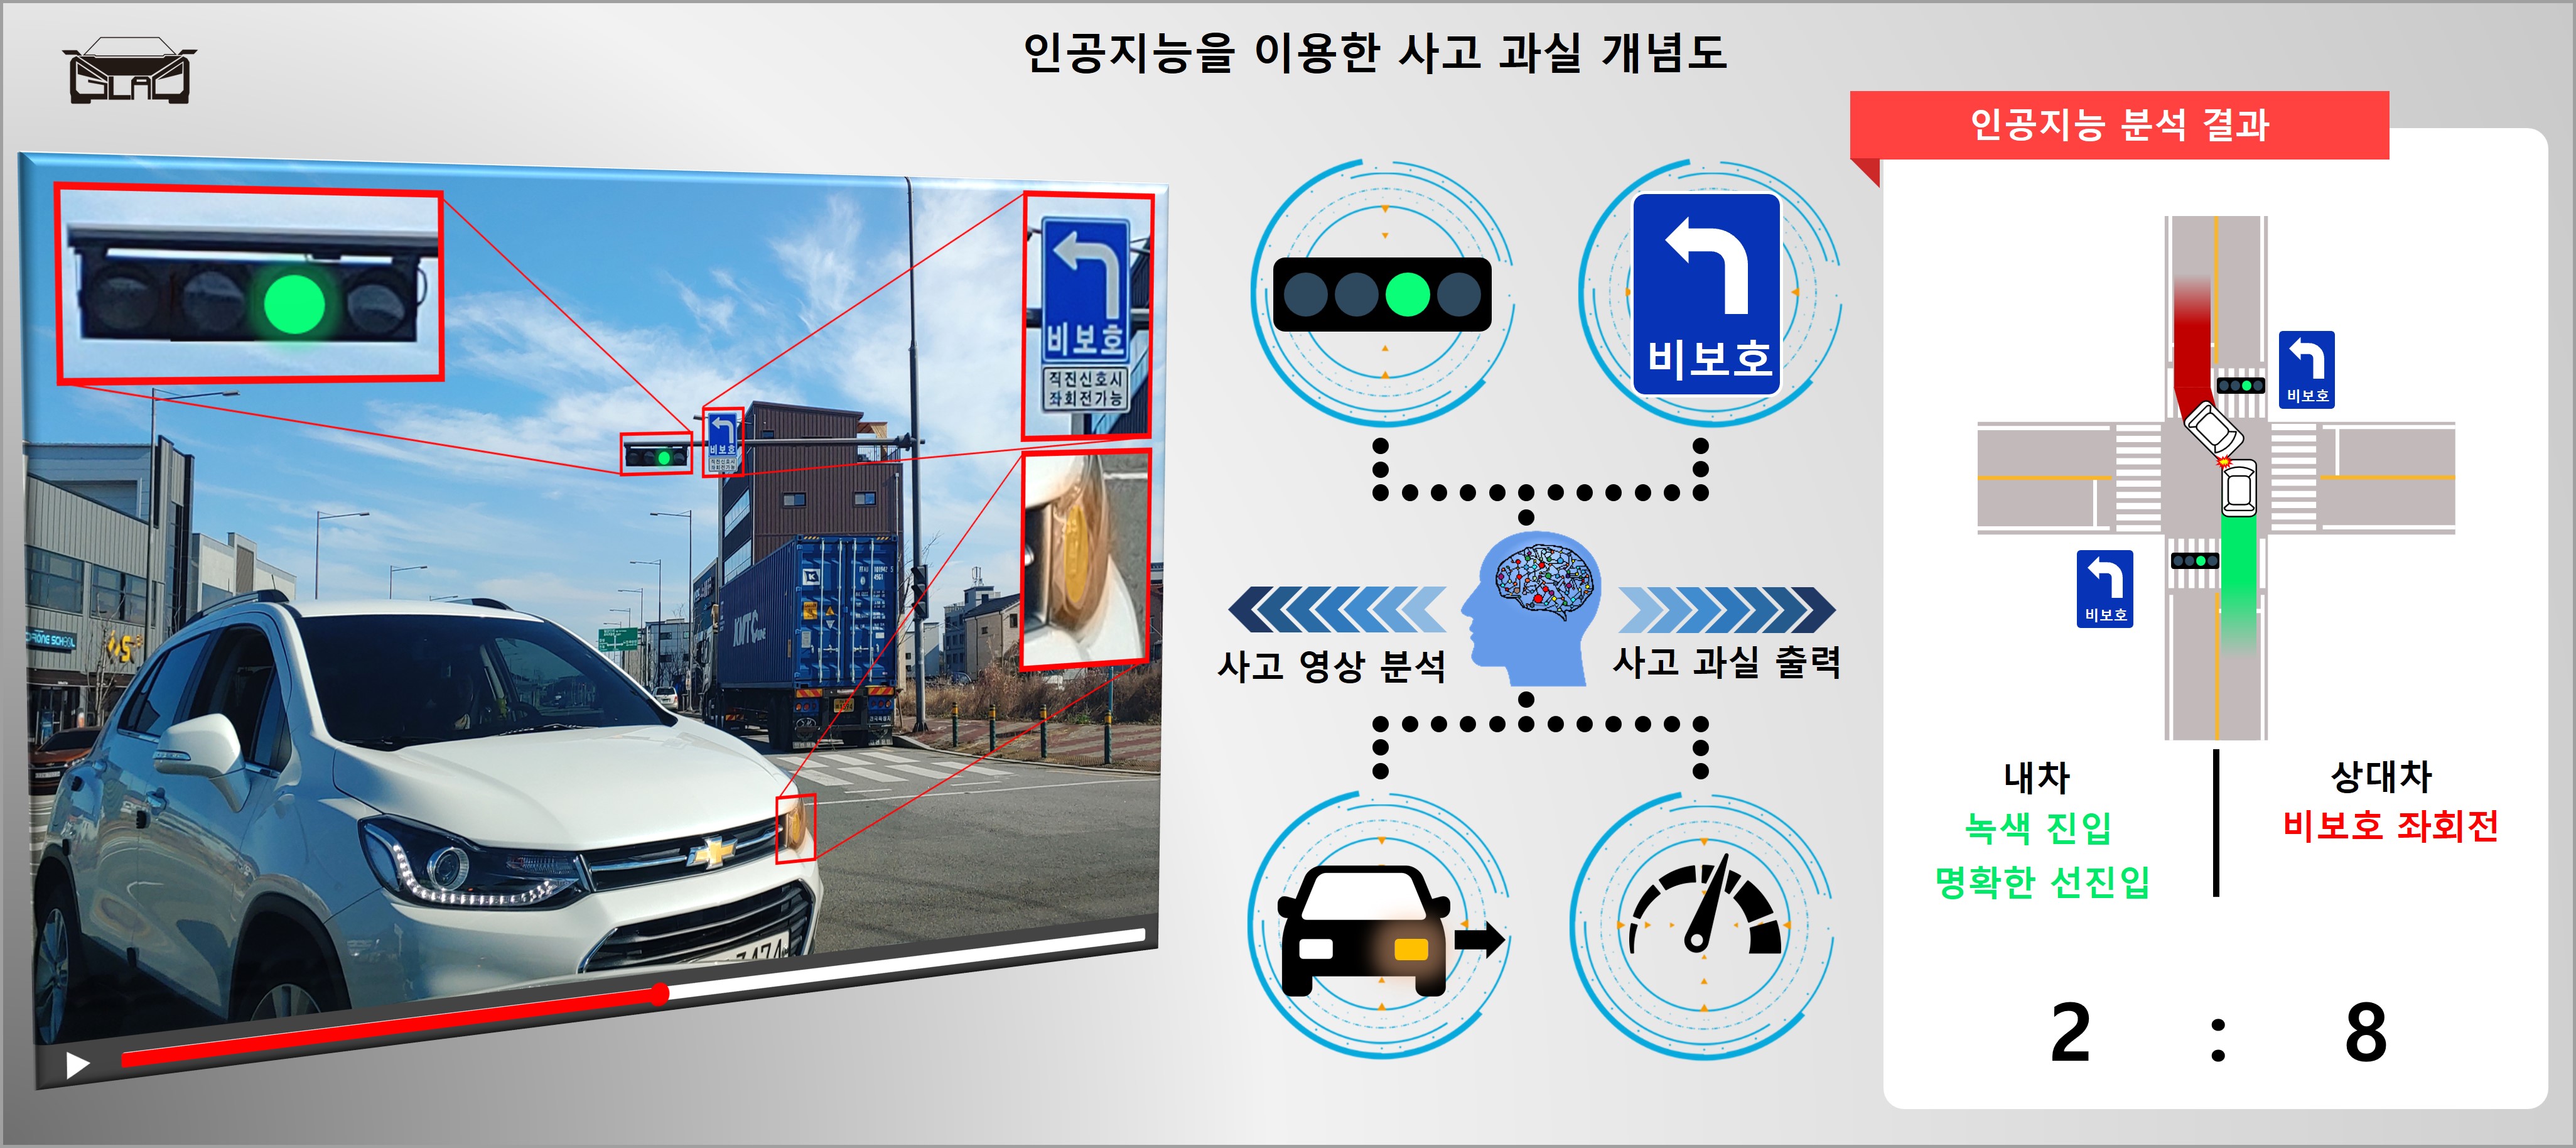 Professor Yong Gu Lee's research team development of traffic accident negligence evaluation technology, "Black box video, artificial intelligence judges!" 이미지